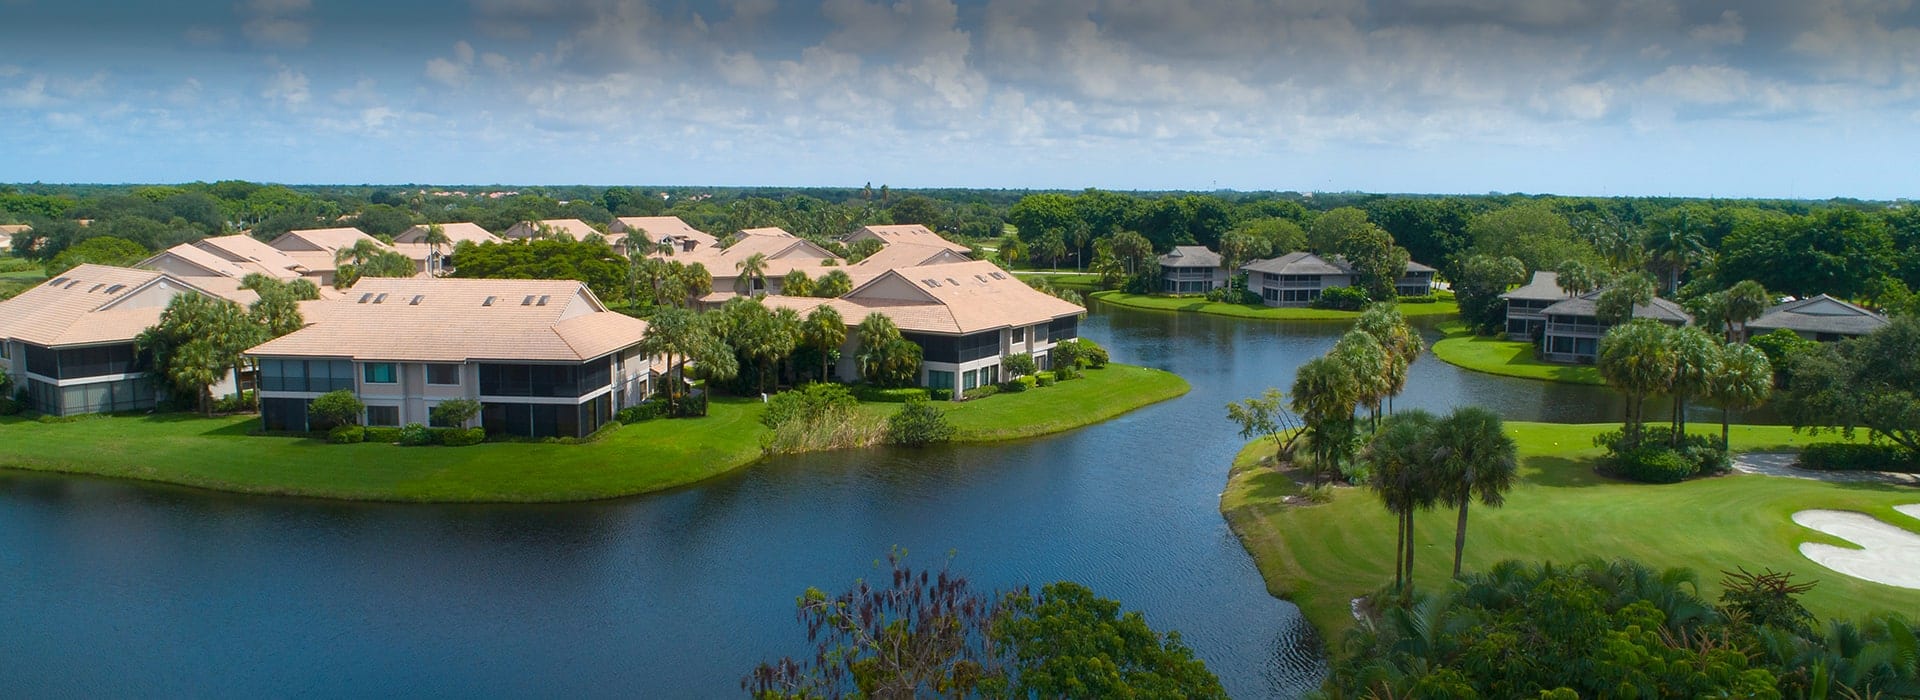 Charter Cay neighborhood in Boca West with attached villas and water views